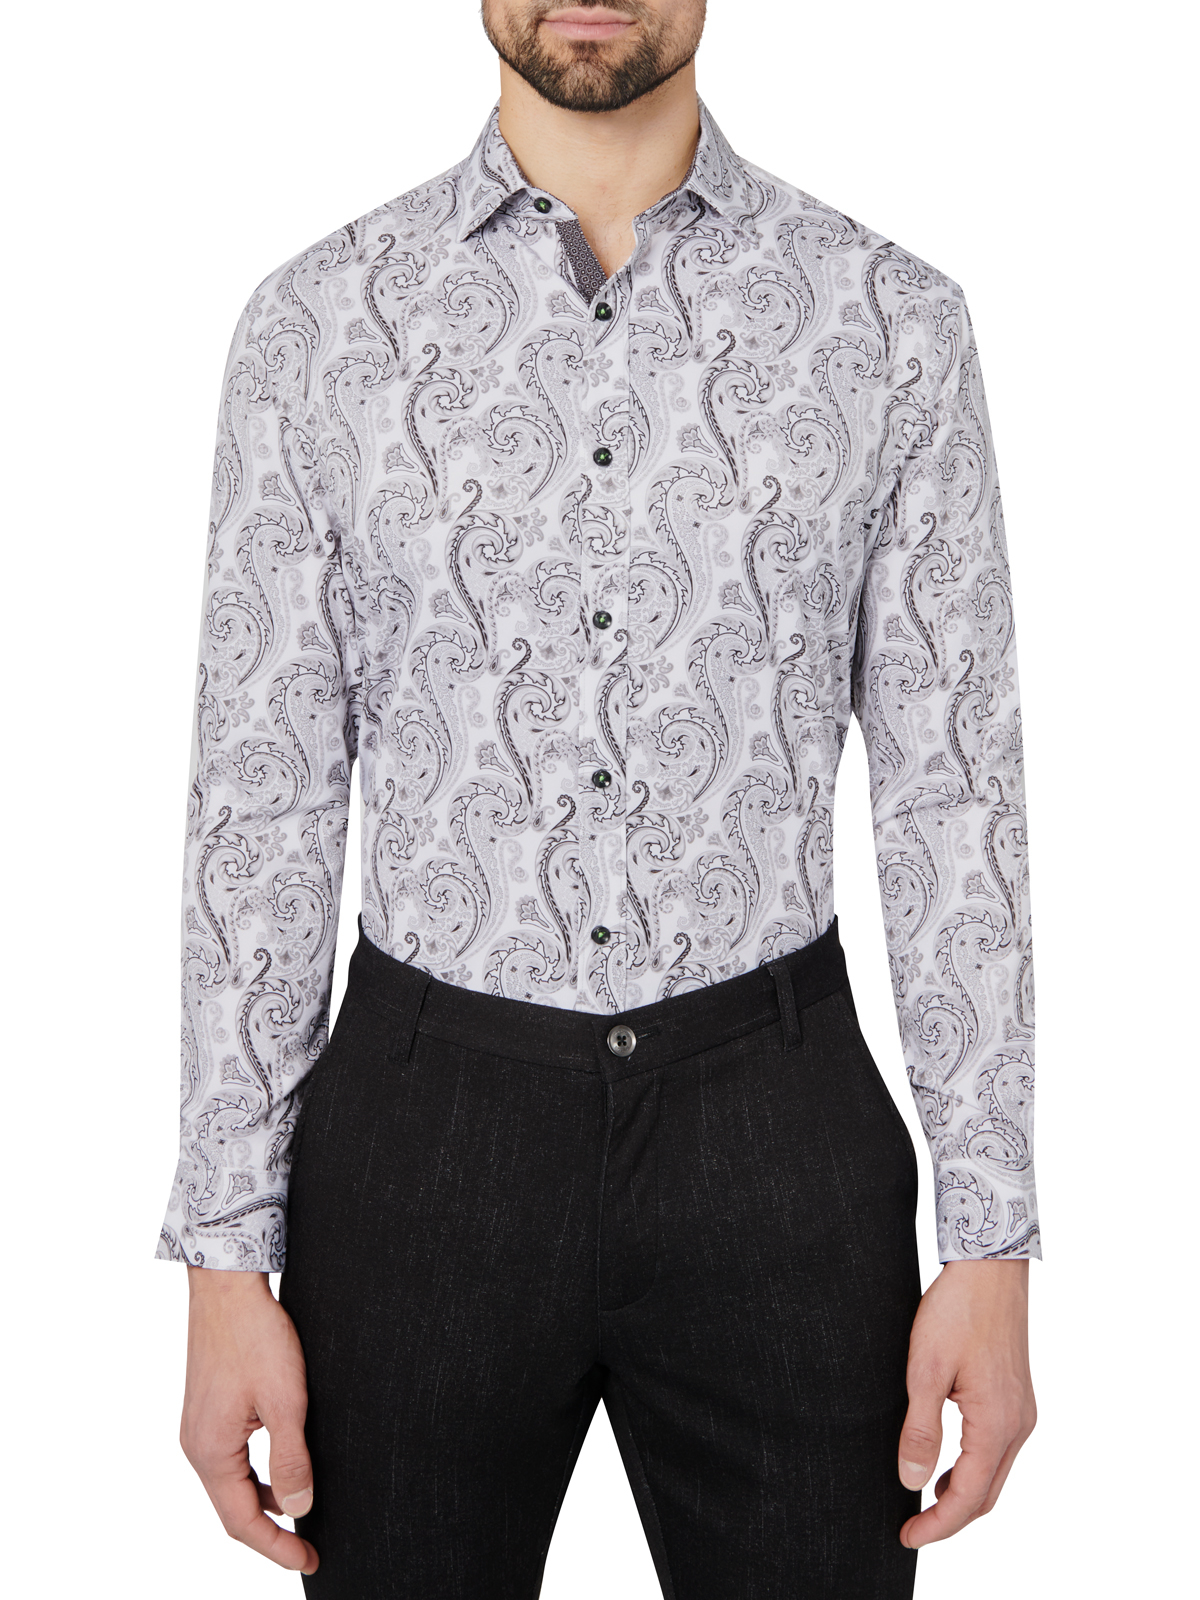 Society Of Threads Ornate Paisley Performance Stretch Dress Shirt For Men